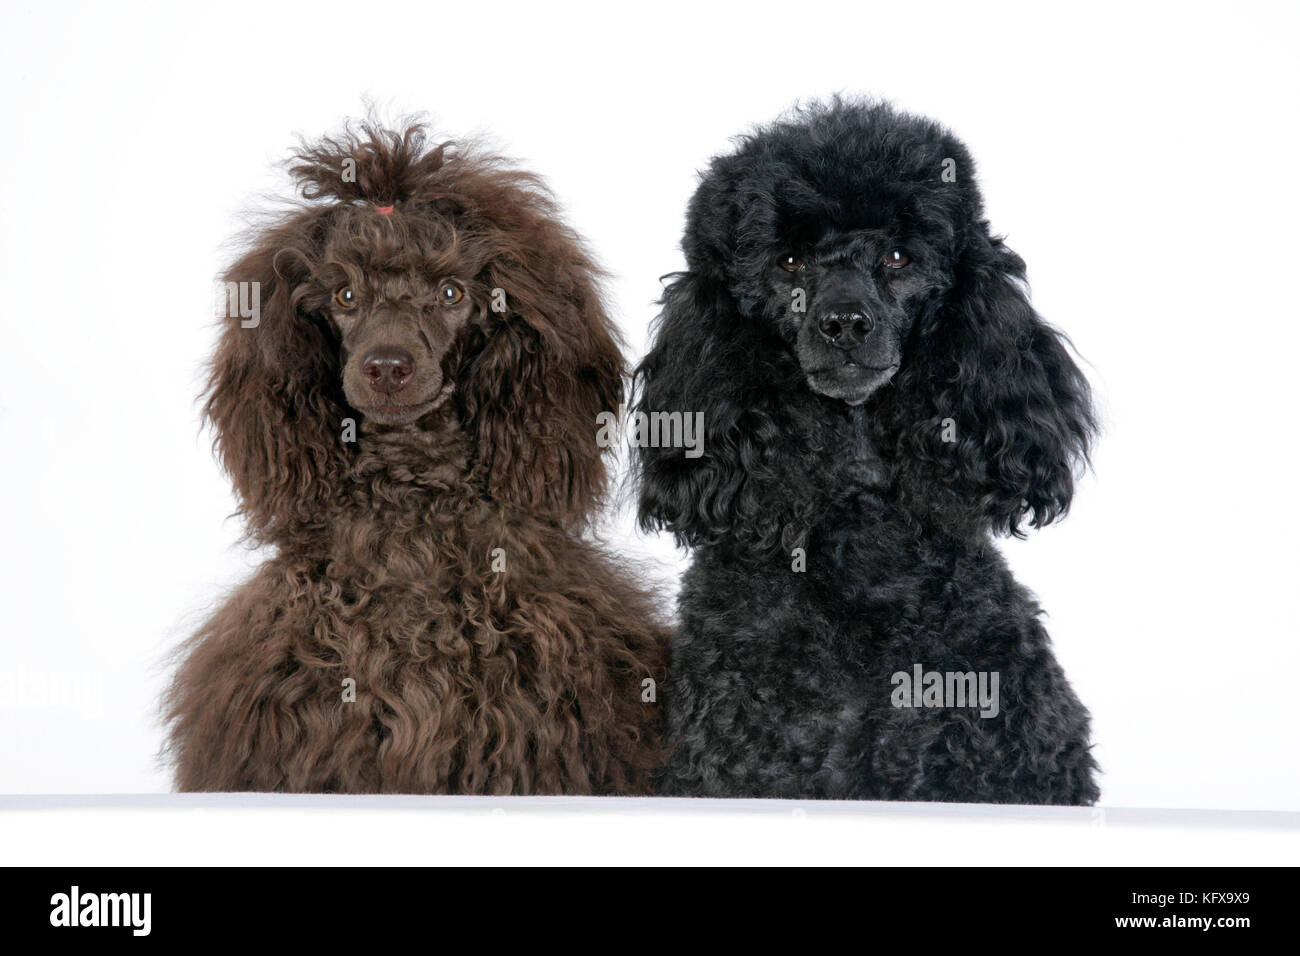 Dog. Brown poodle and black poodle with paws over ledge Stock Photo